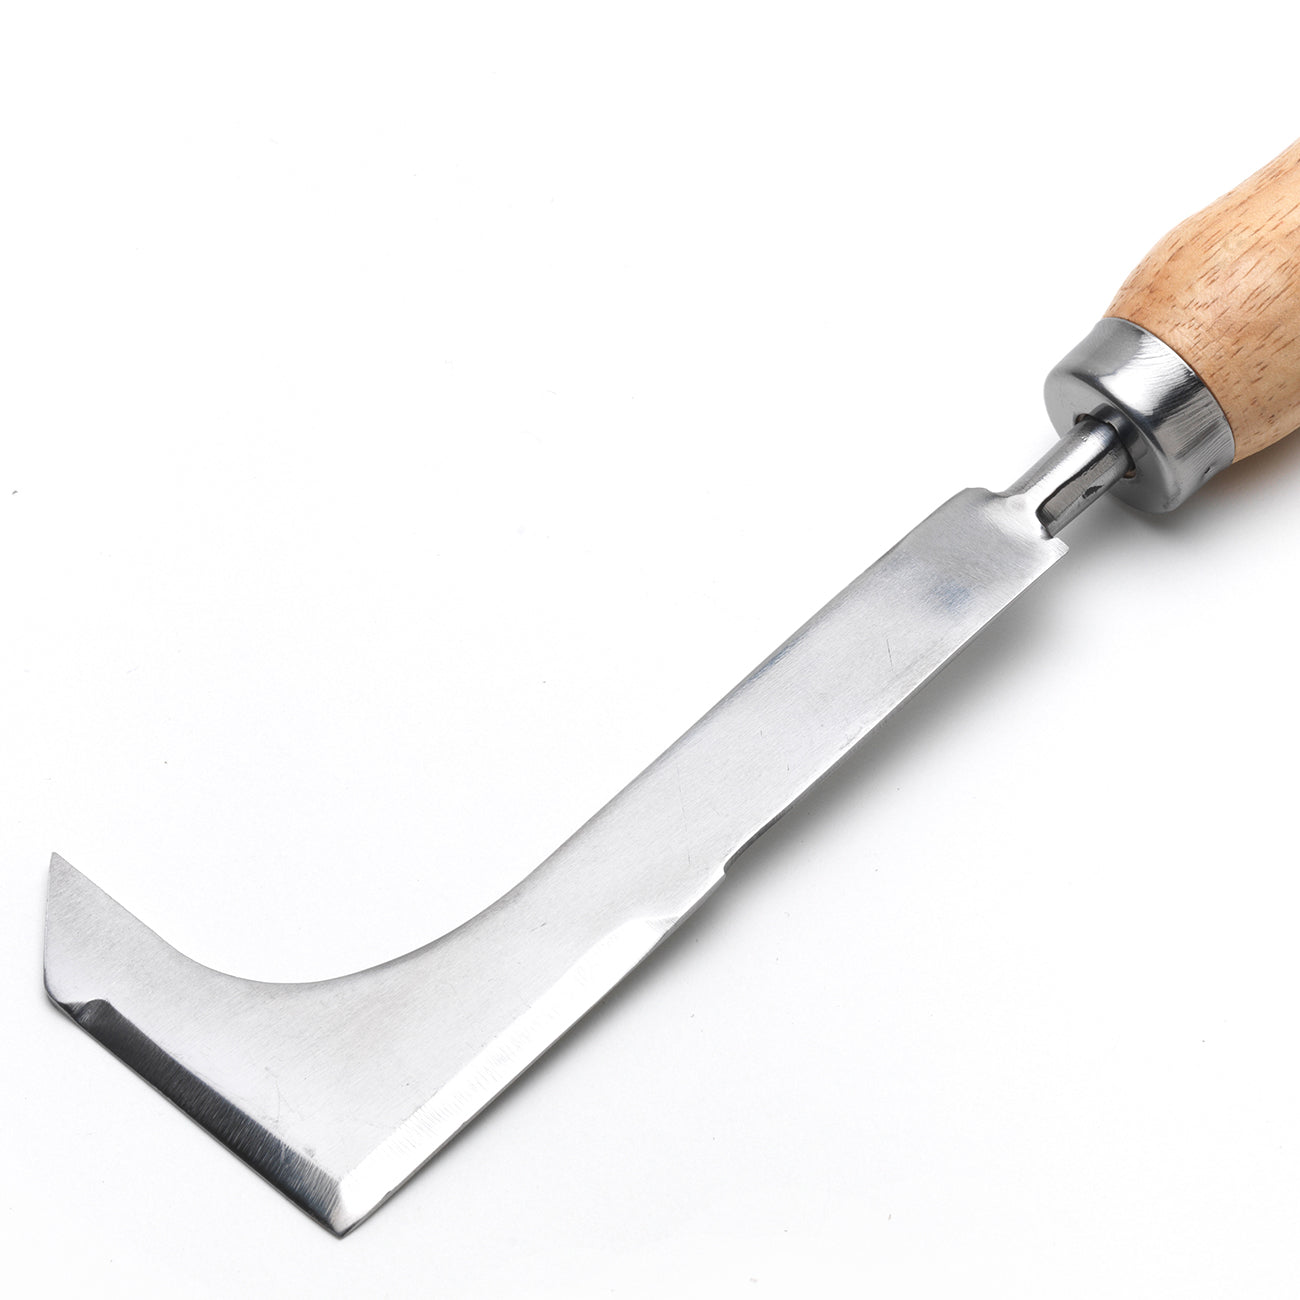 The stainless steel of this block paving knife is extremely resistant to rust.